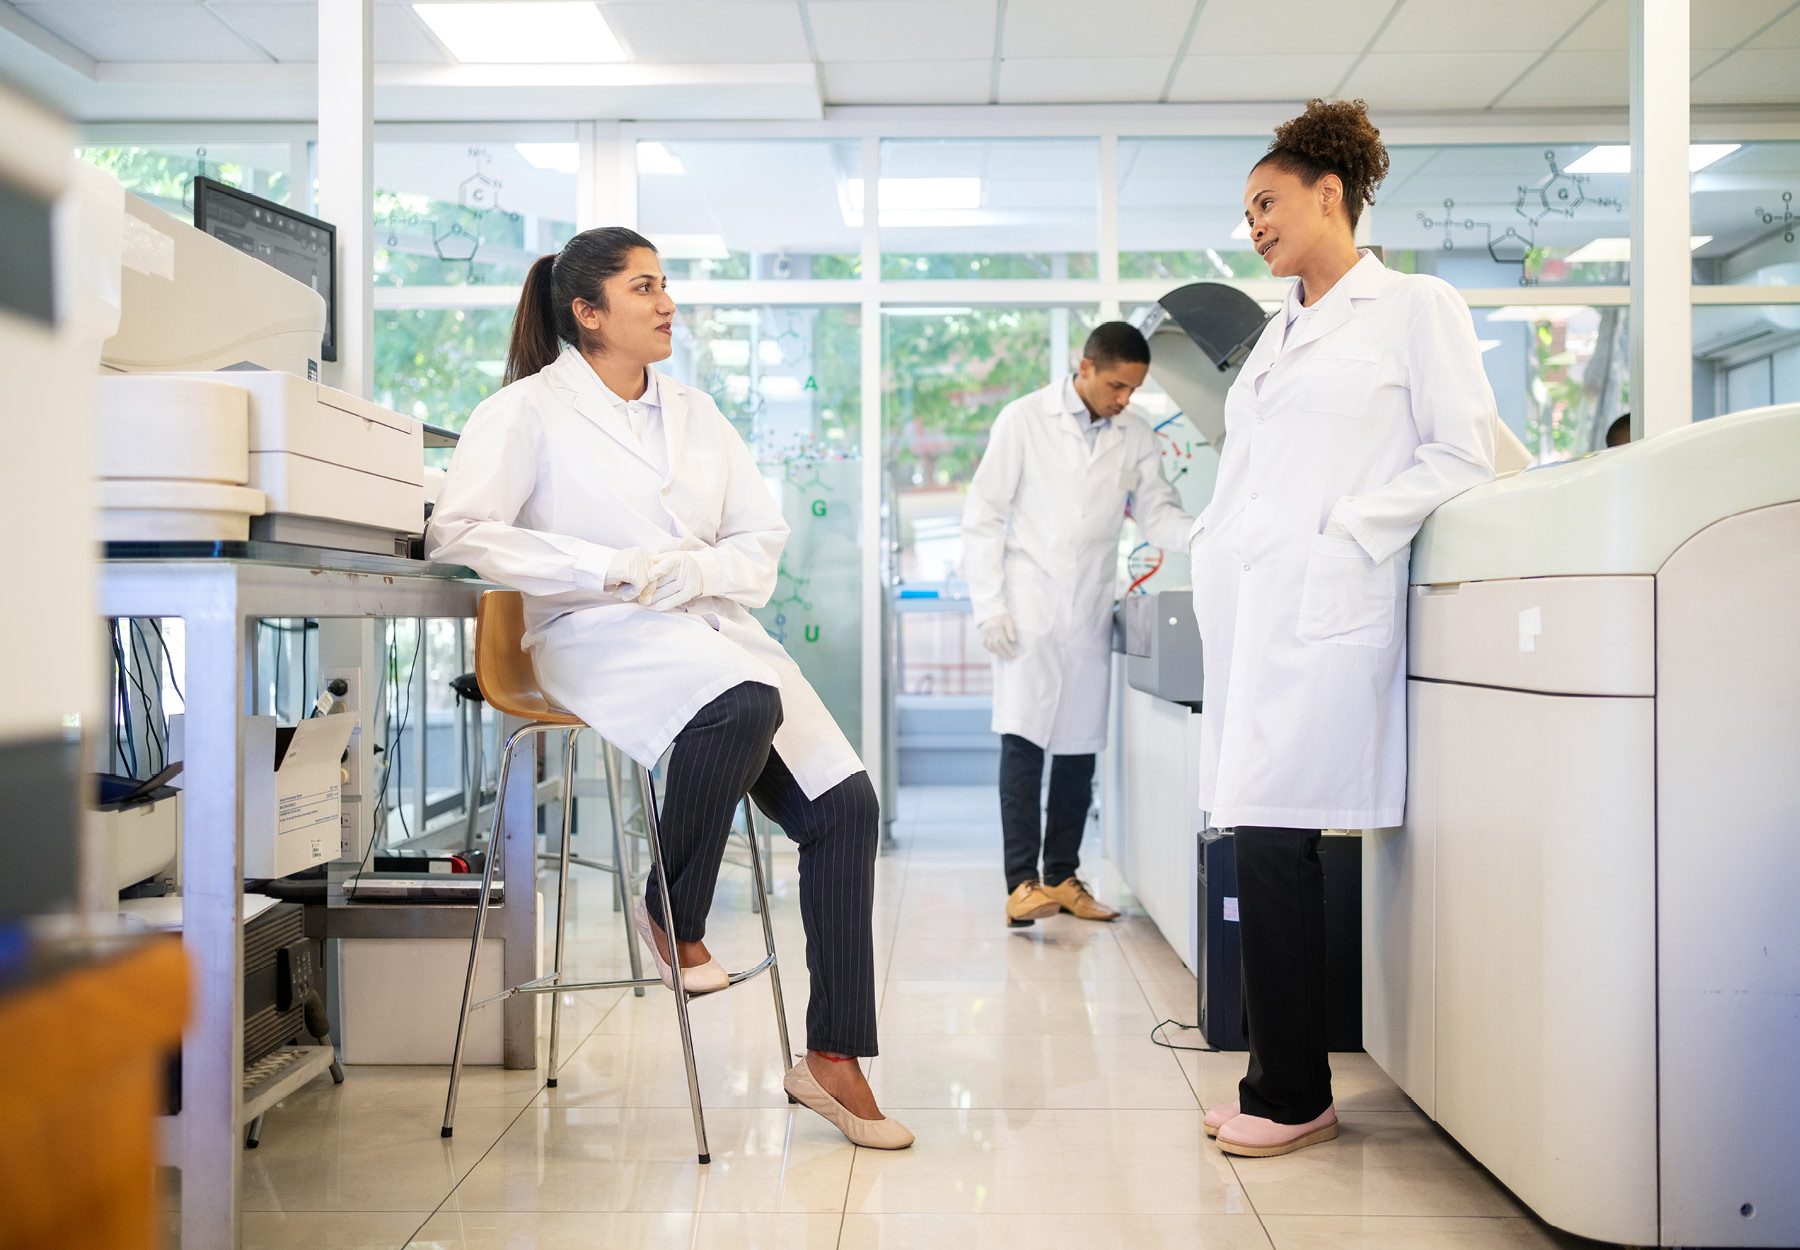 Medical lab technicians discussing work together in a laboratory iStock image